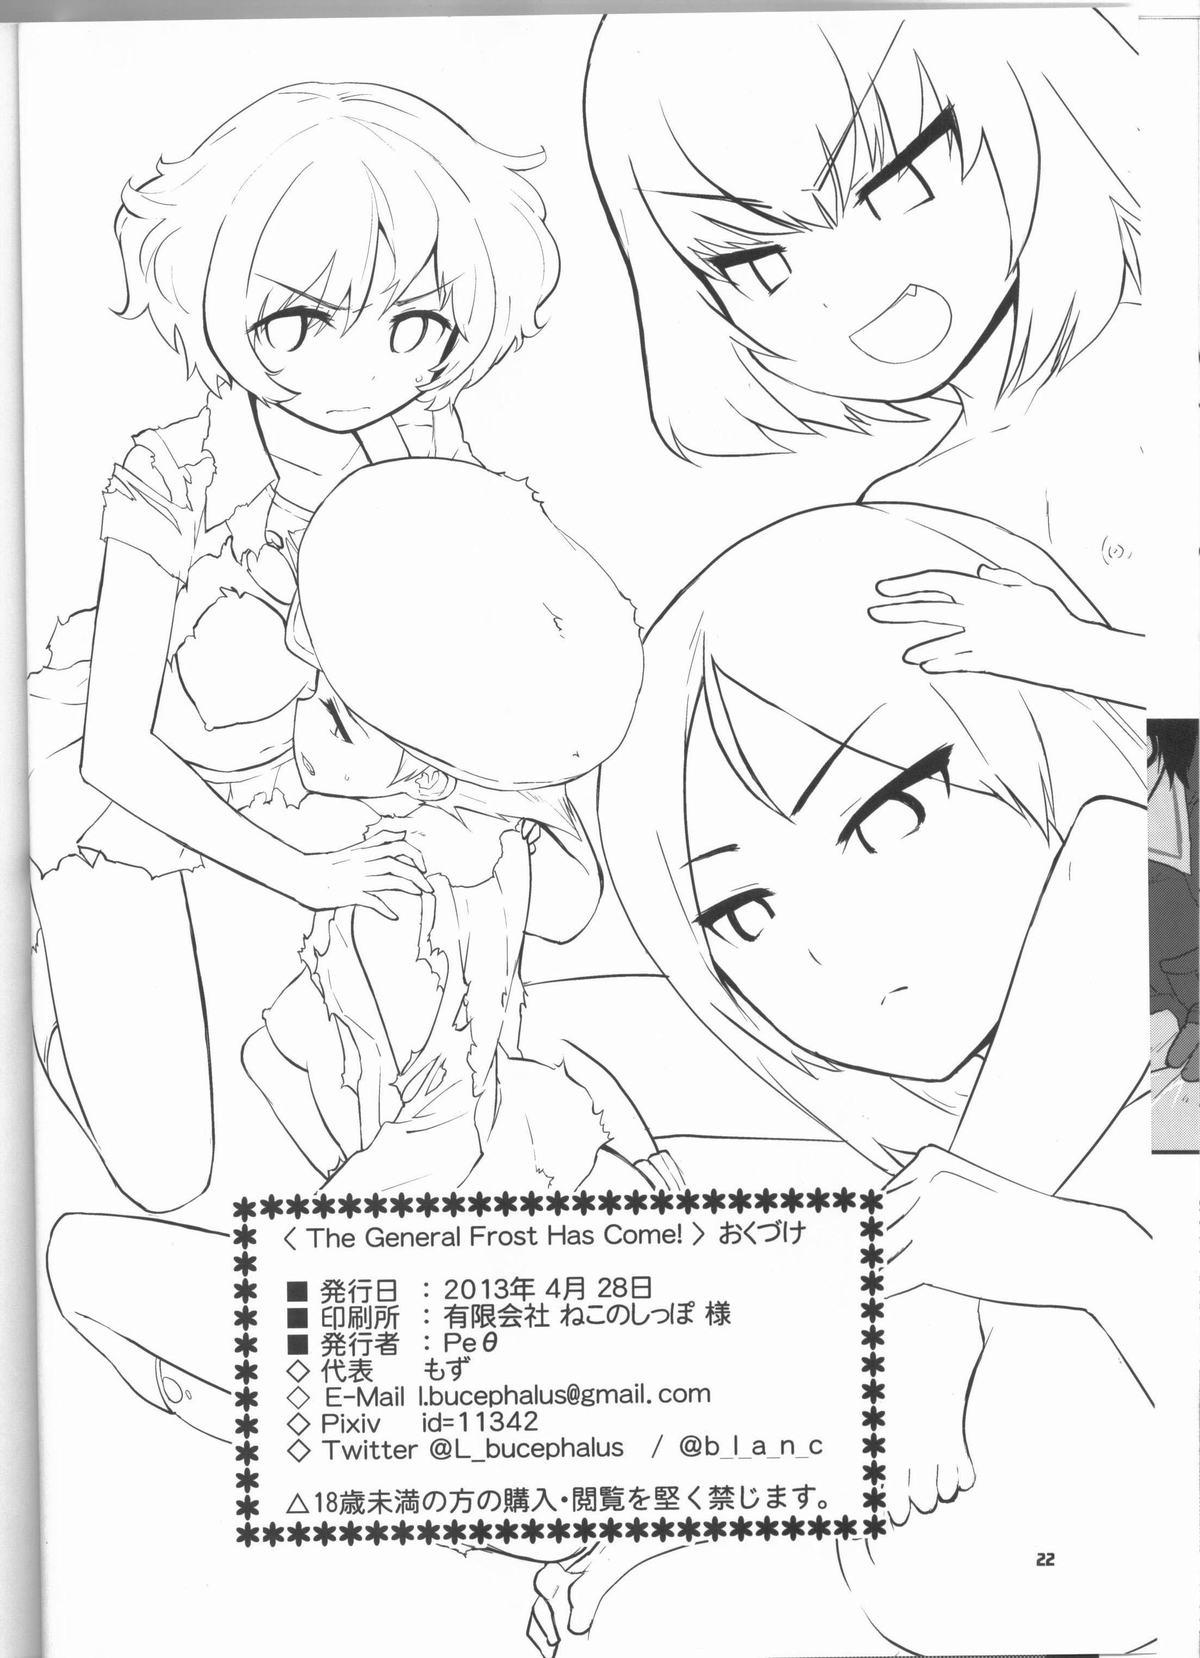 Stepfamily The General Frost Has Come! - Girls und panzer Gemidos - Page 21